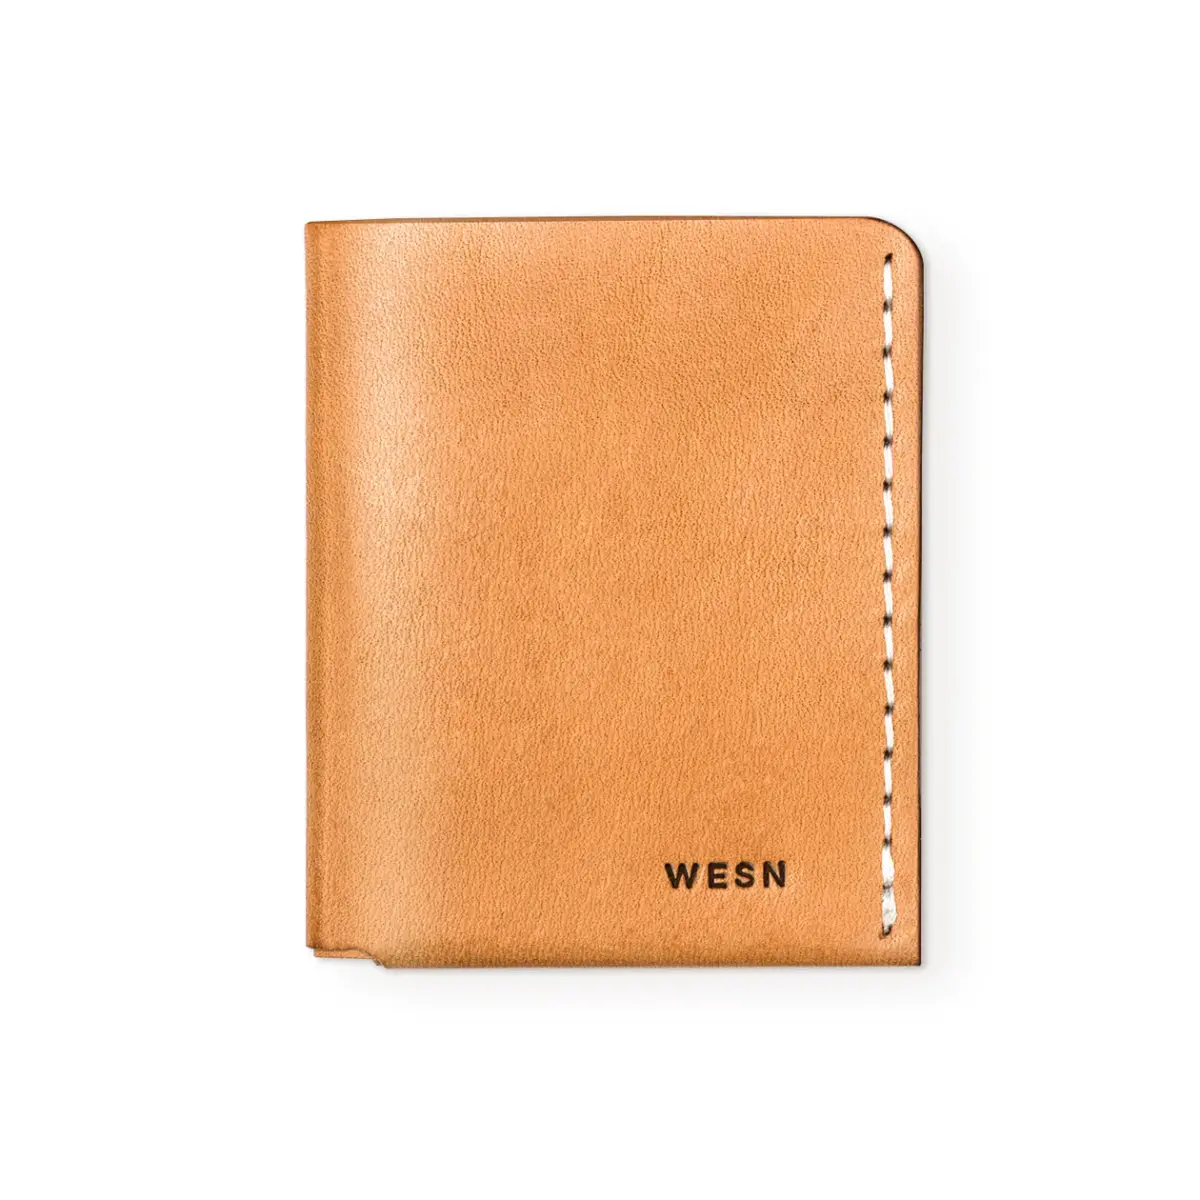 WESN Forsta thin leather bifold wallet